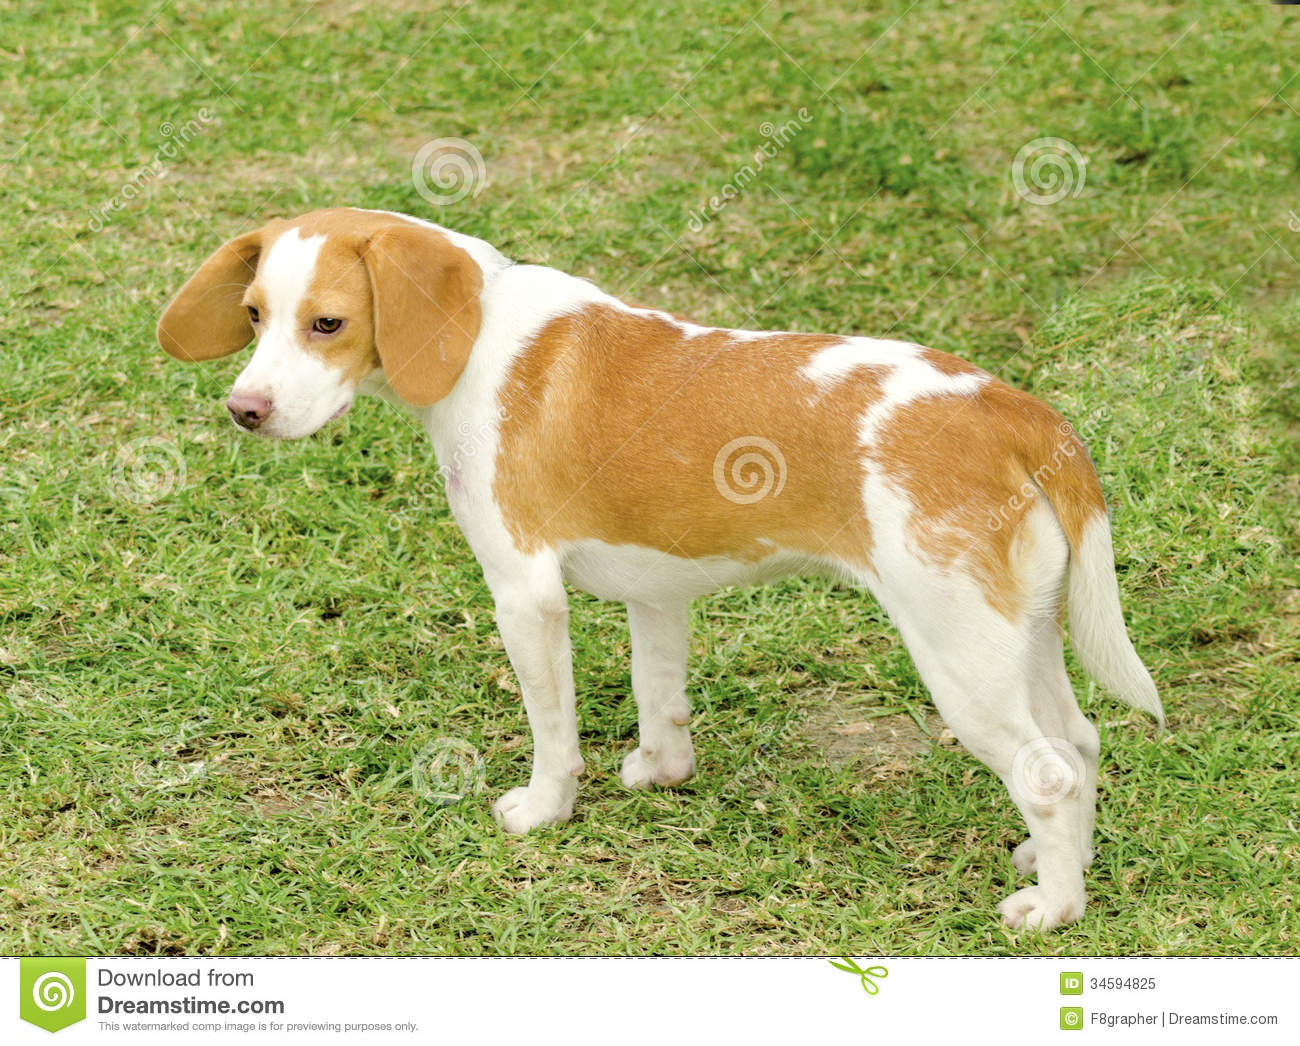 Istrian Shorthaired Hound Dog: Royalty Free Stock Istrian Shorthaired Hound Young Beautiful White Orange Puppy Dog Standing Lawn Short Haired Breed